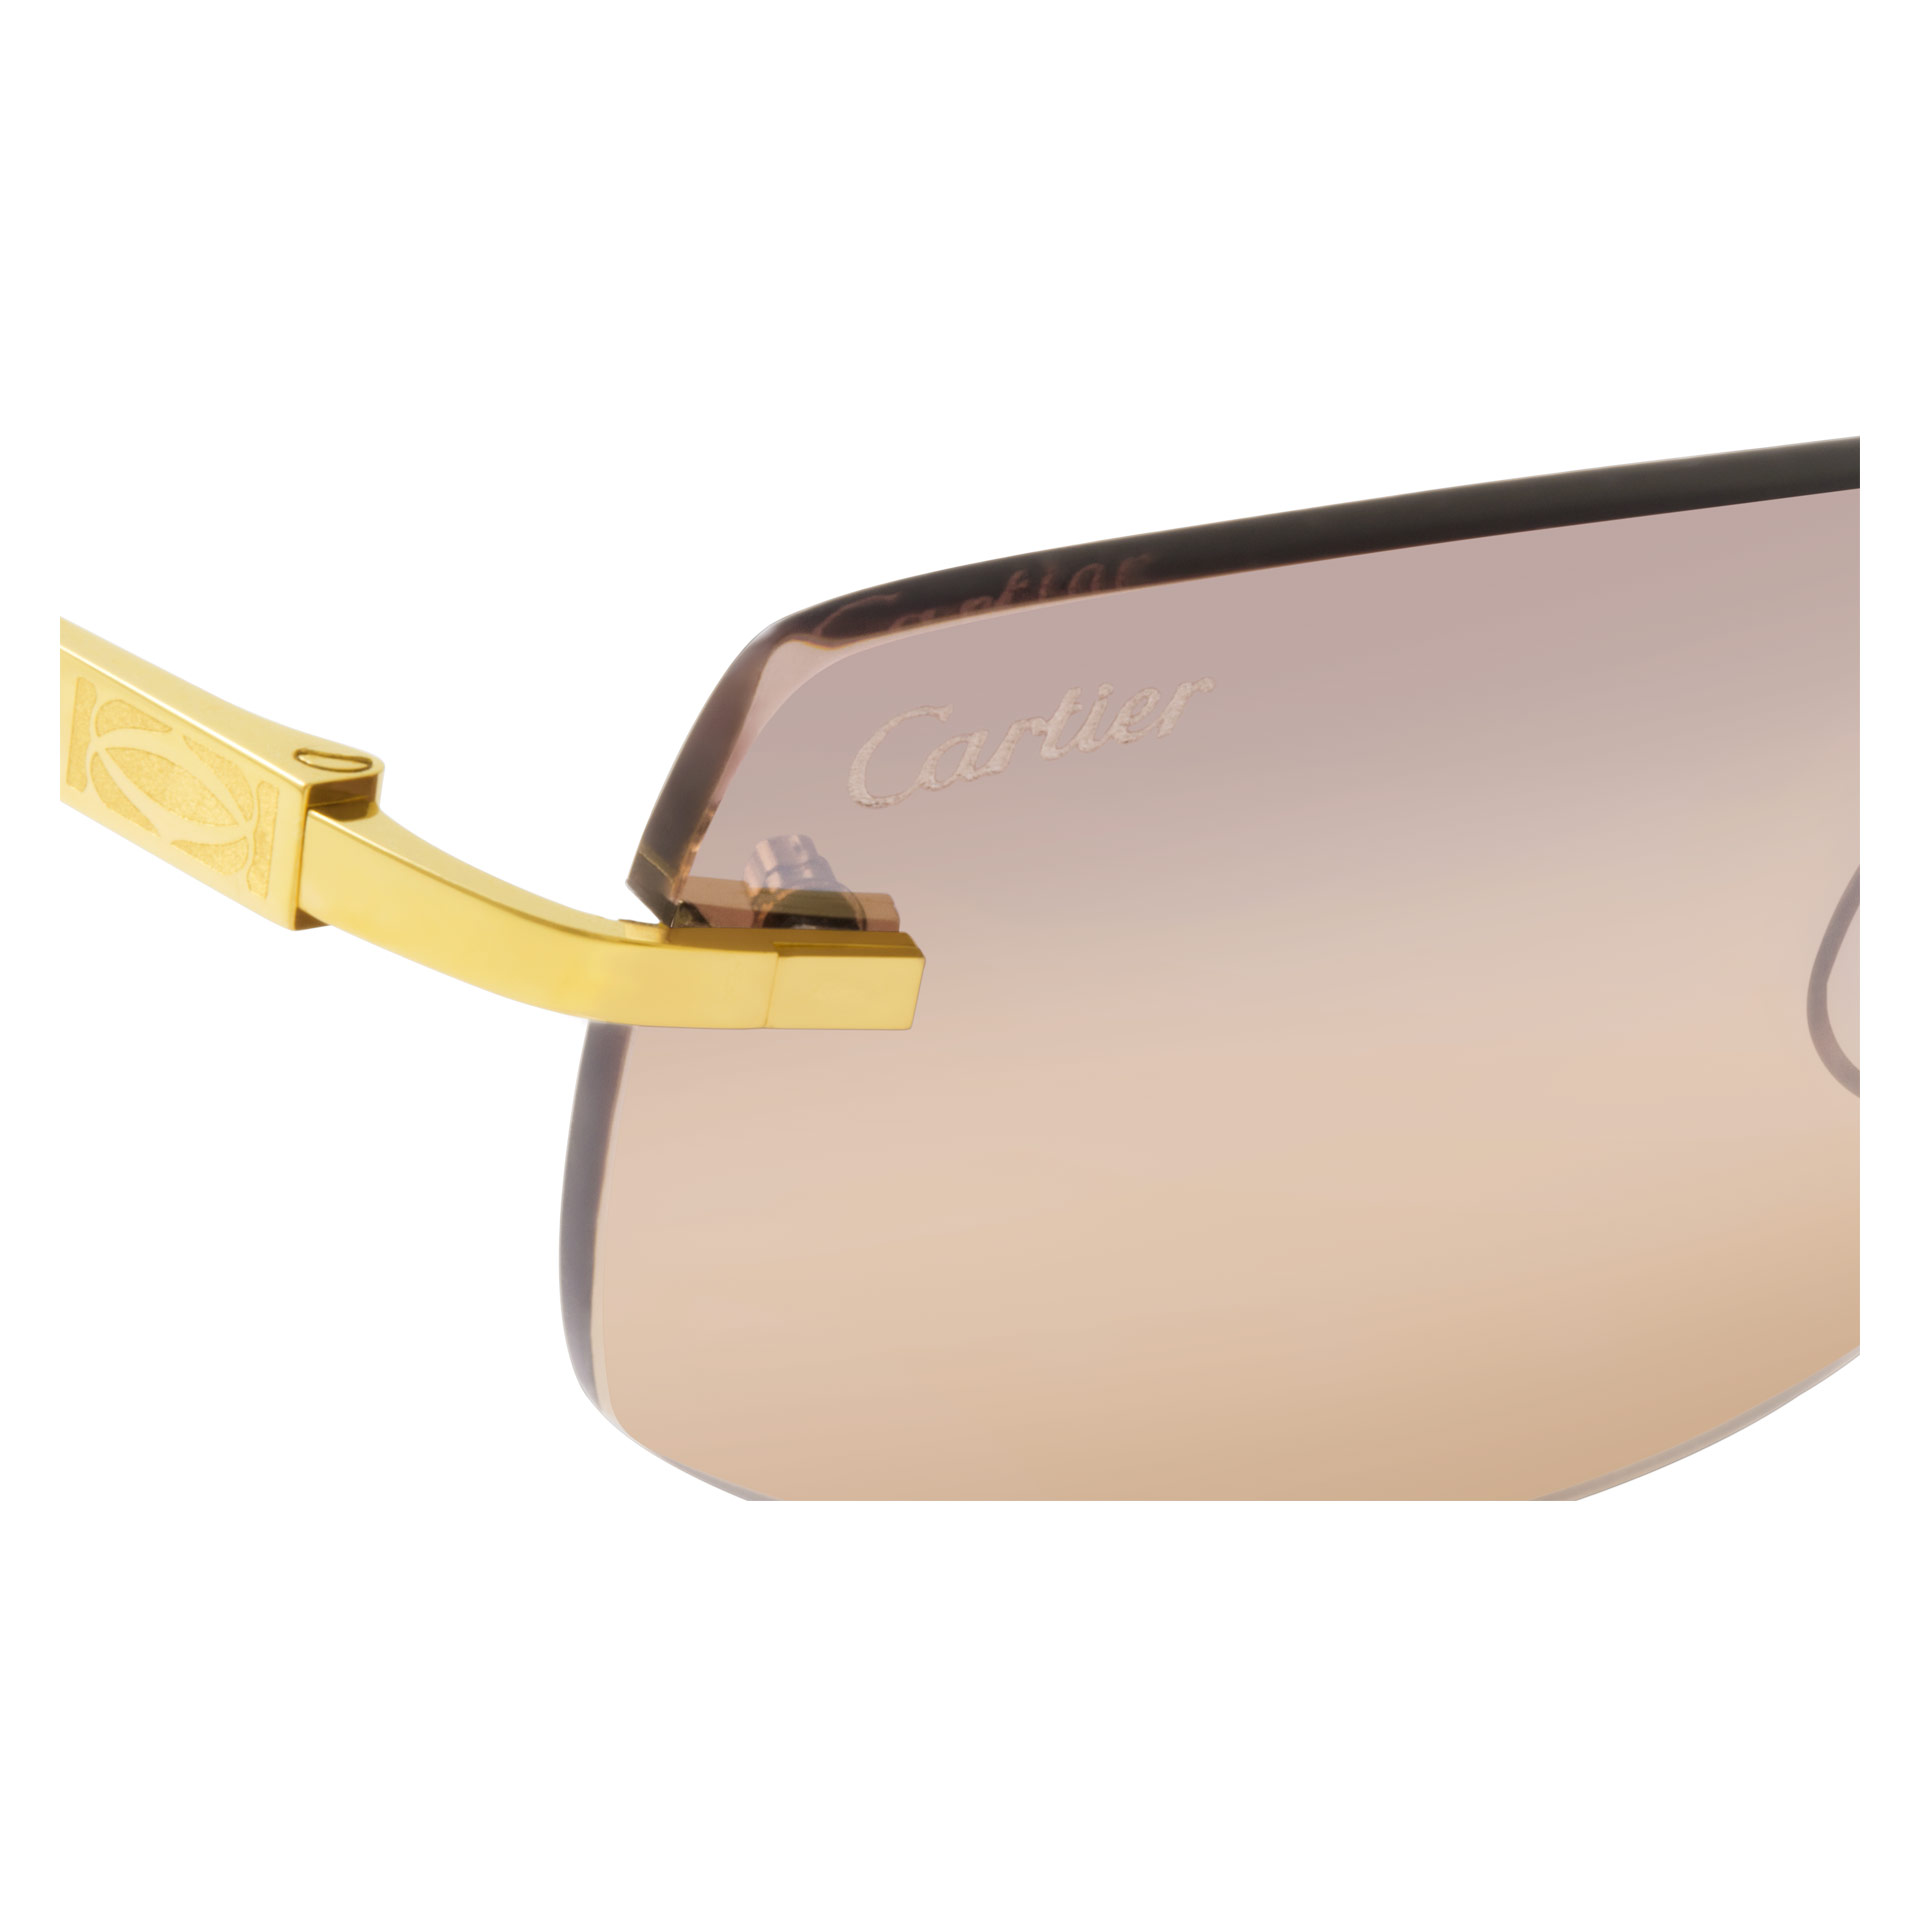 Cartier glasses in 18k gold plated frame with diamond accent at the temple image 3